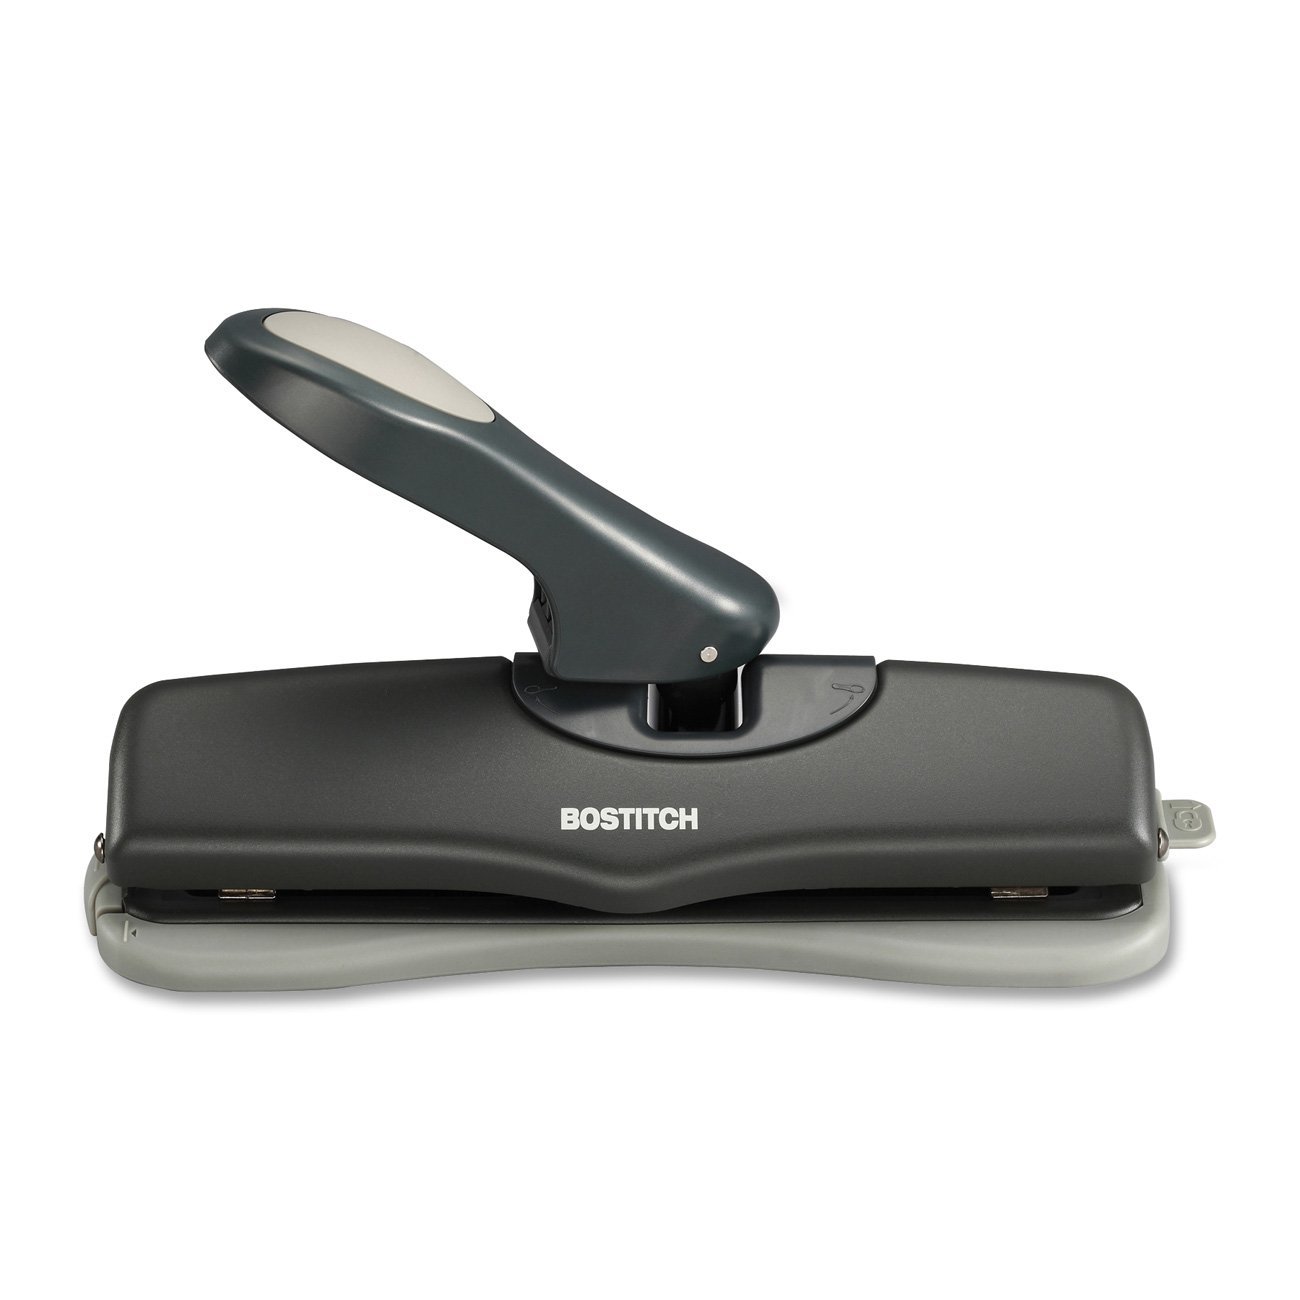 Stanley Bostitch Electric 3 Hole Punch 